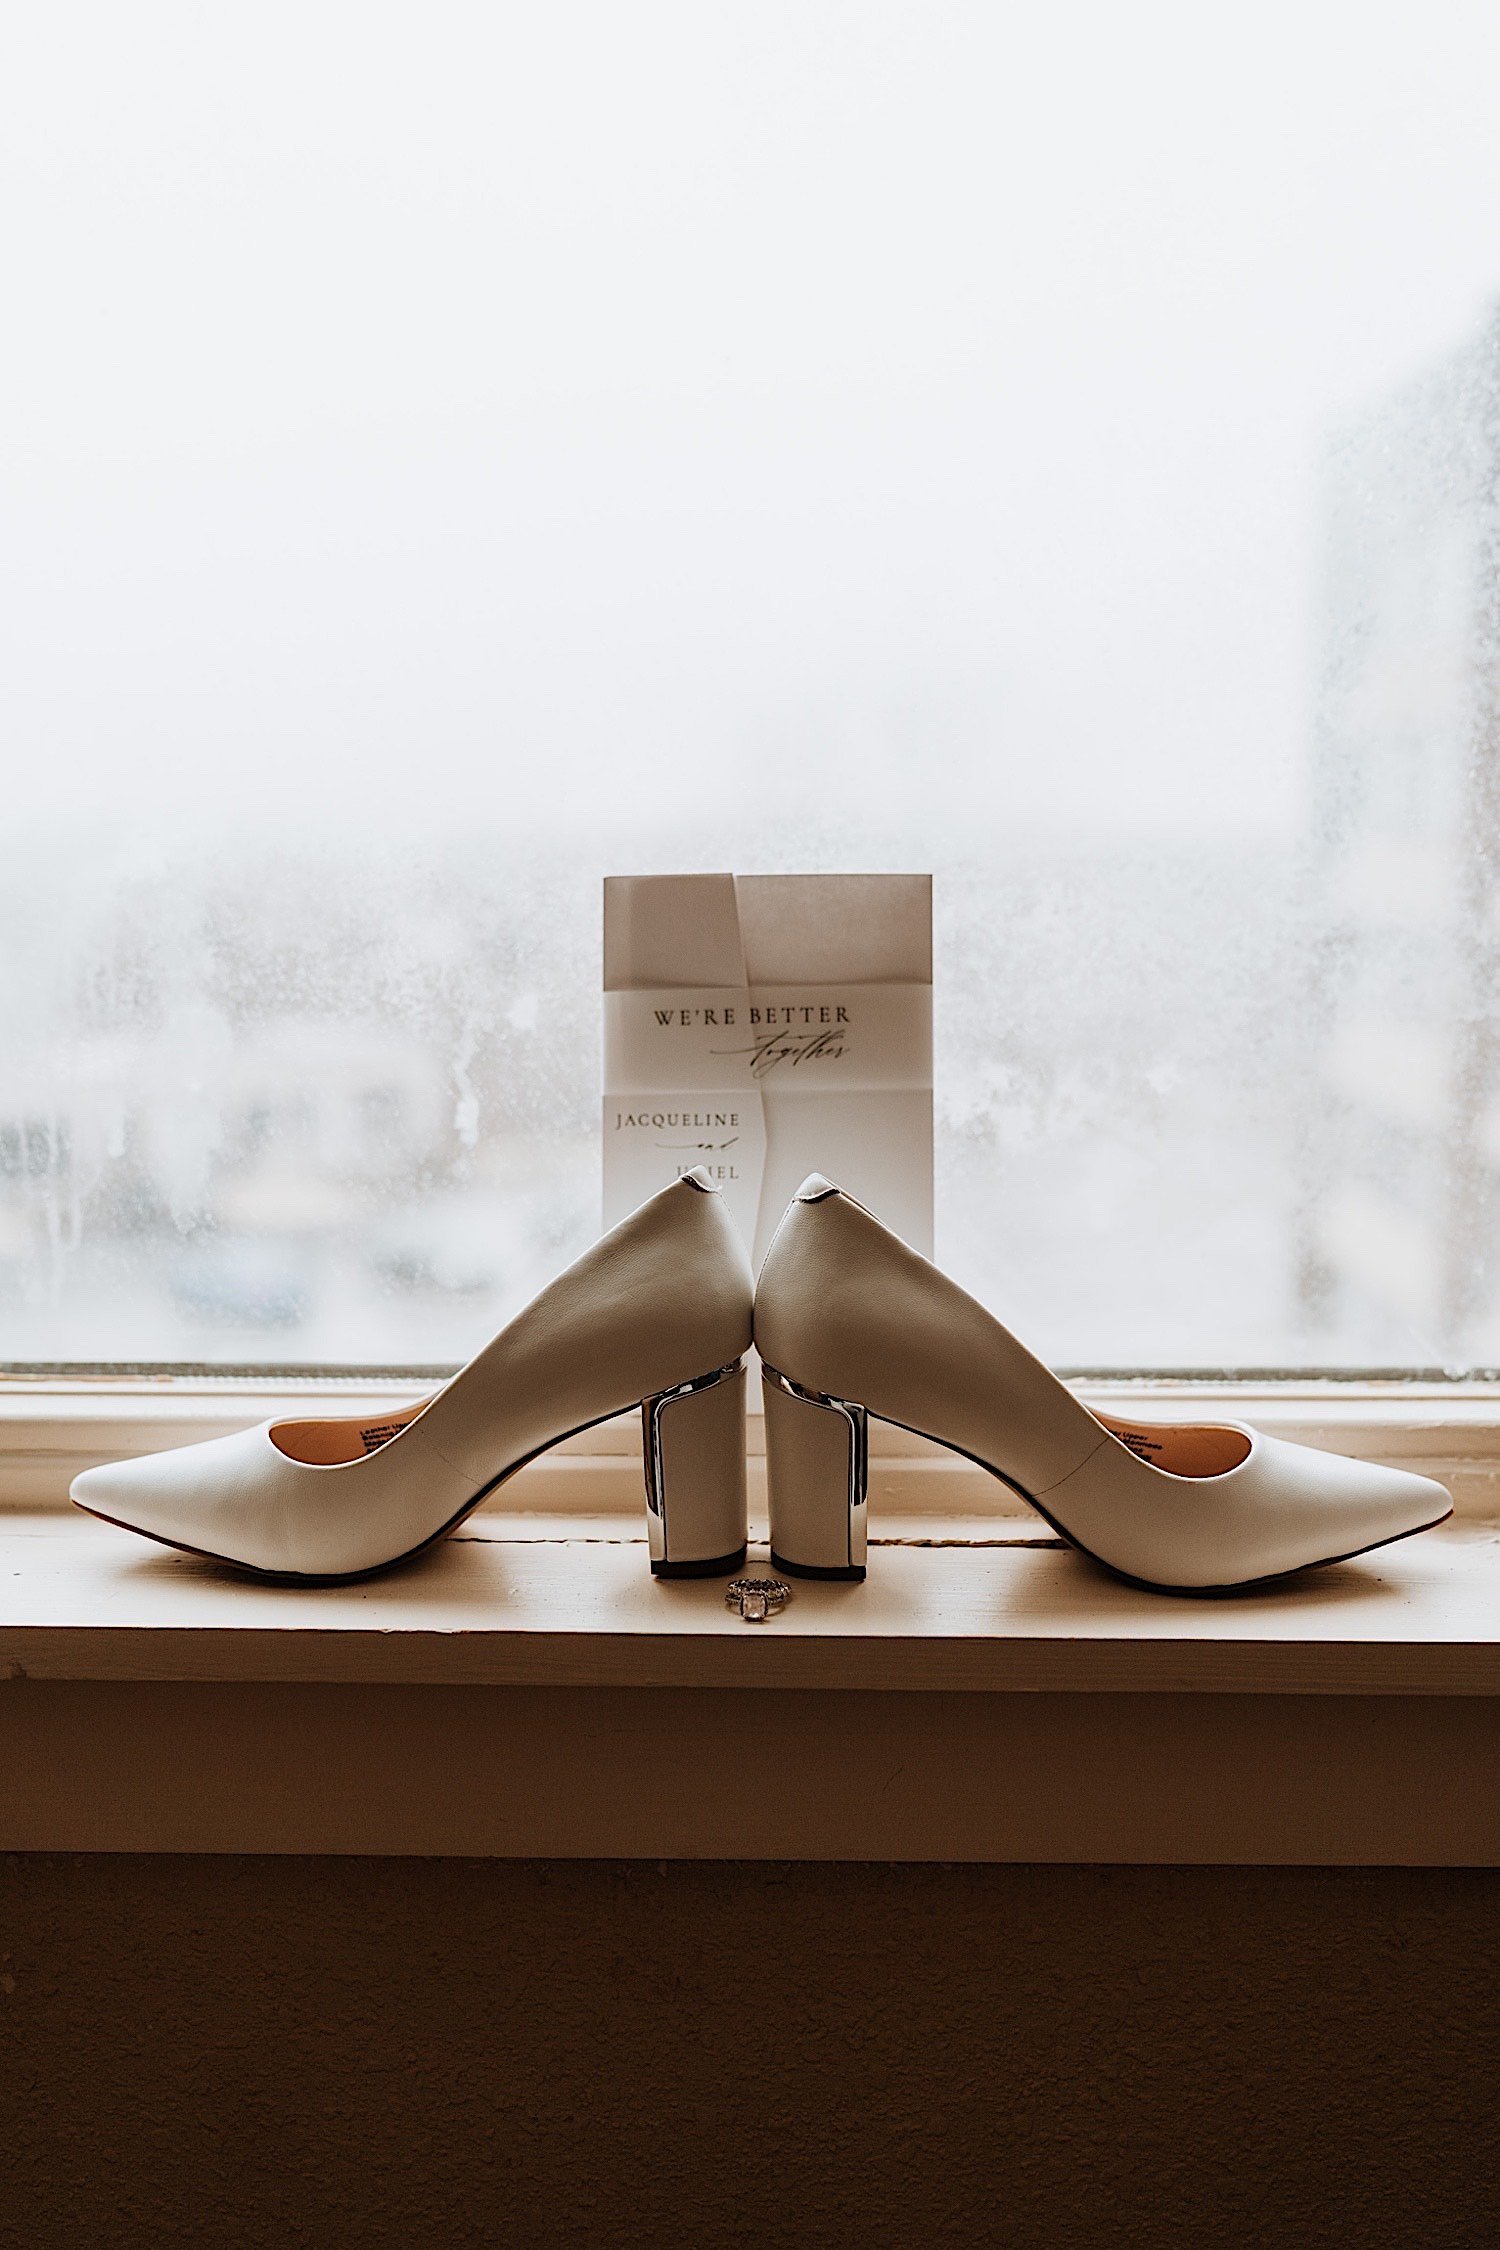 White shoes with a wedding invite behind them places in front of a window